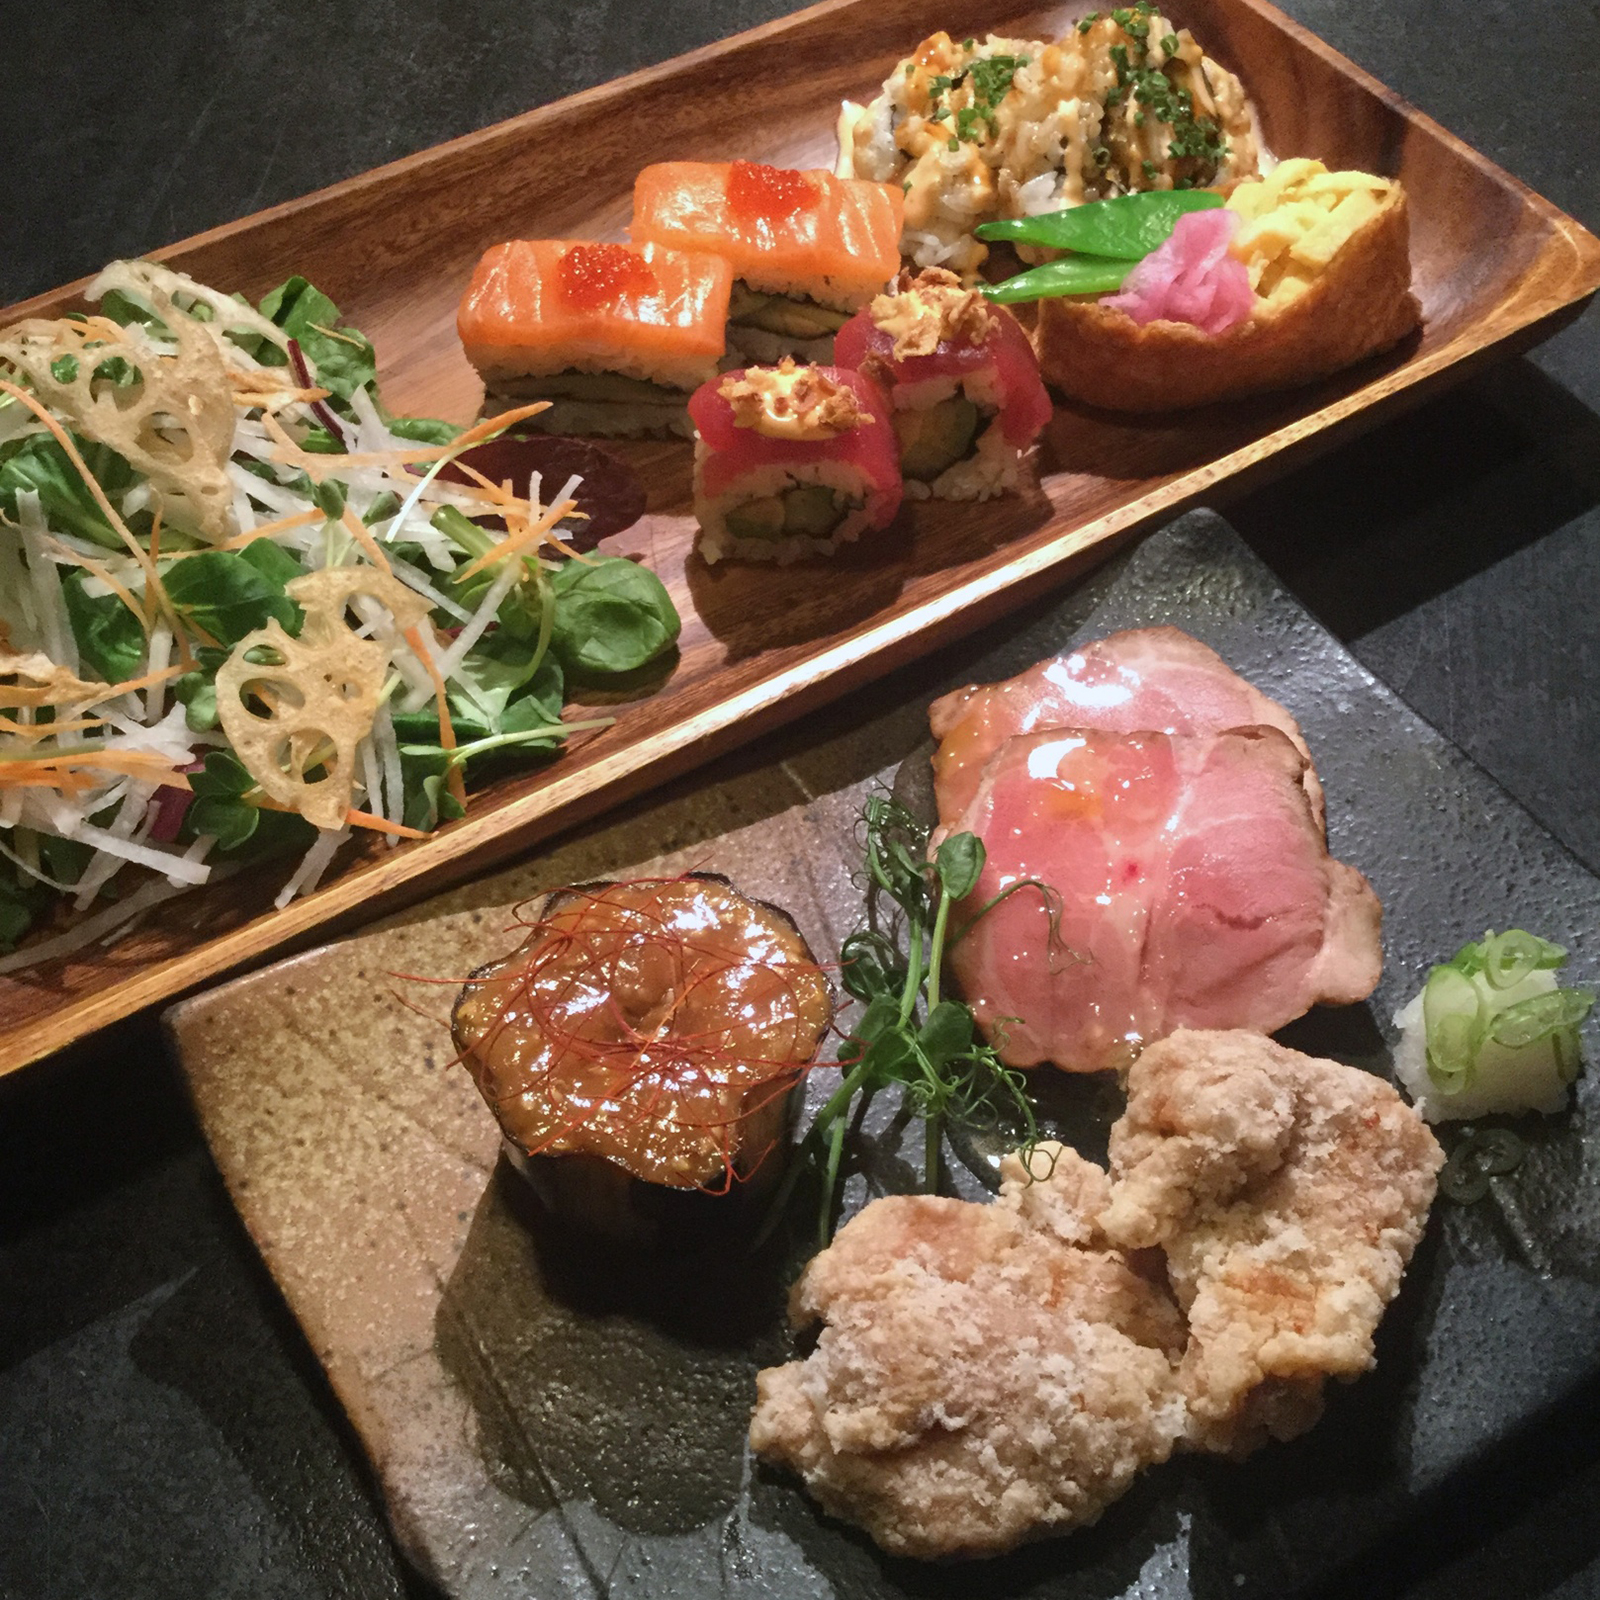 many genuine japanese dishes are available for catering